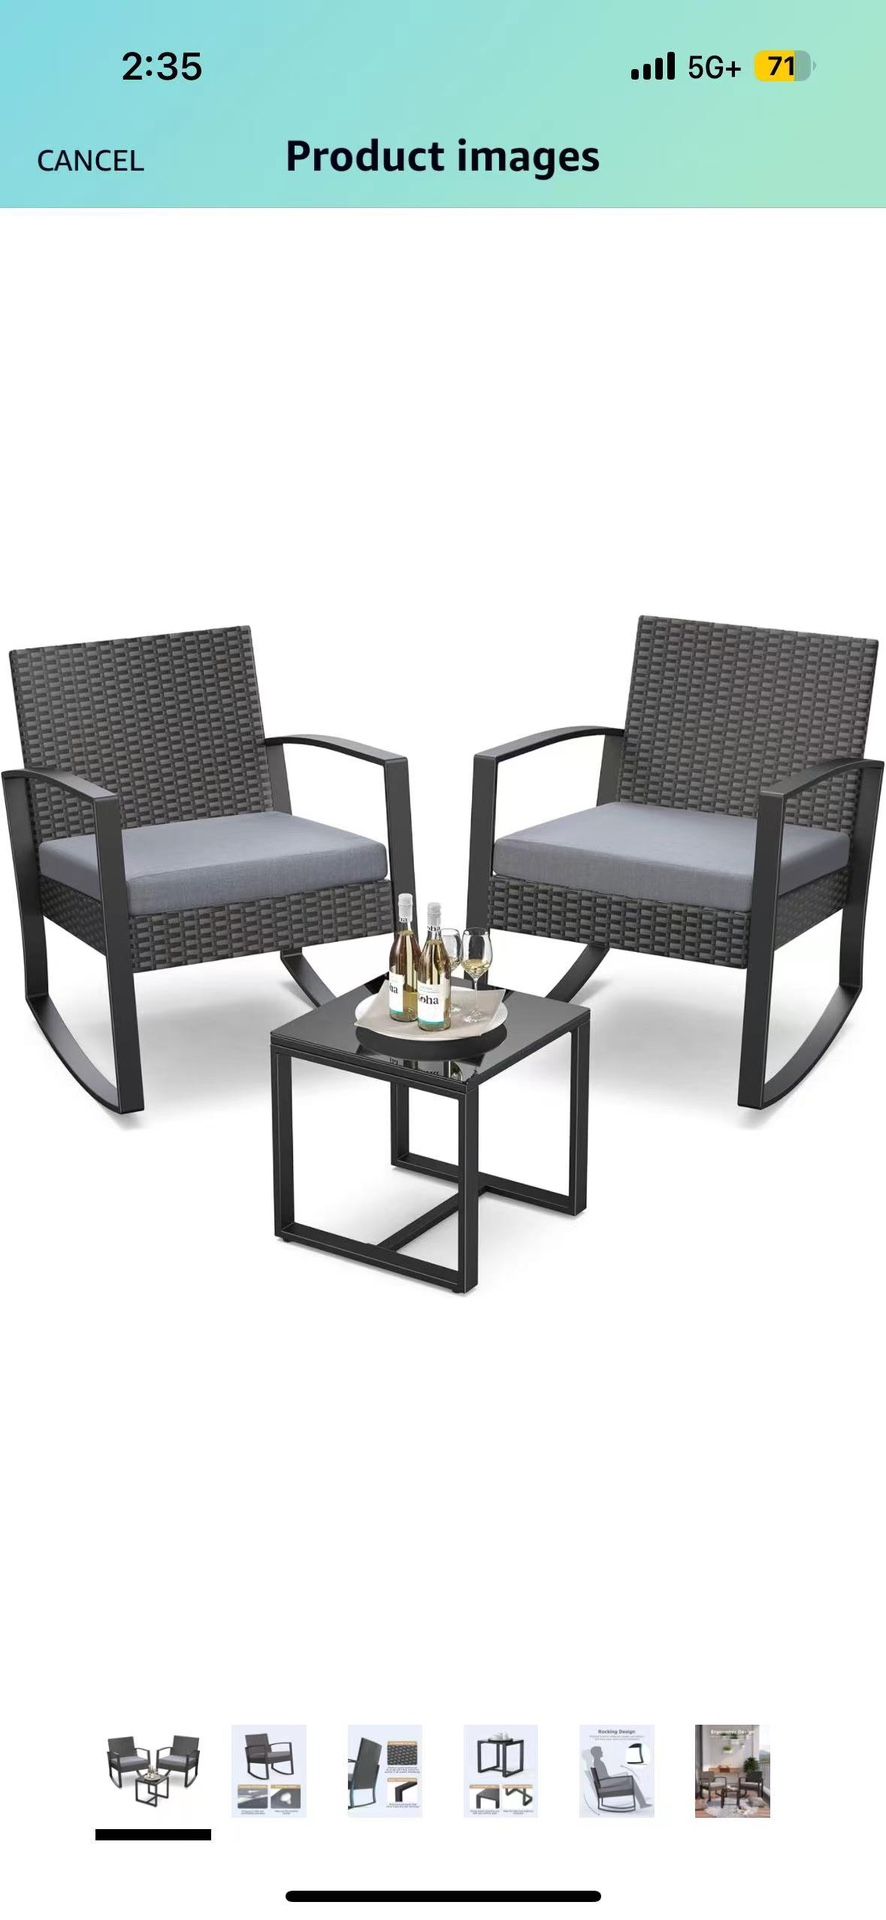 3 Pieces Patio Furniture Set Rocking Bistro Set Outdoor Rattan Conversation with Coffee Table for Garden Balcony Backyard Poolside (Grey Cushion)